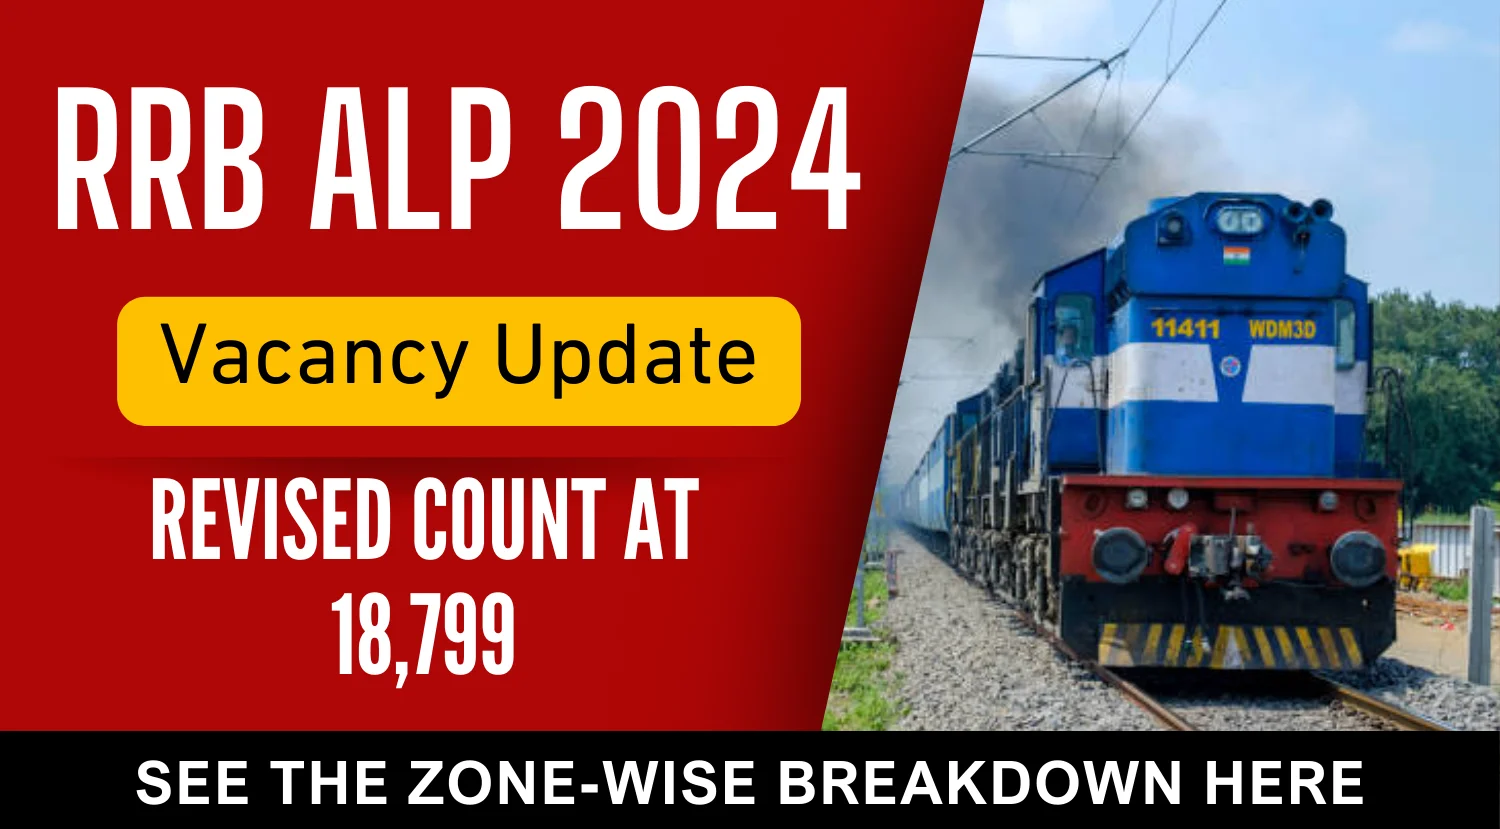 RRB ALP 2024 Vacancy Update Revised Count at 18799